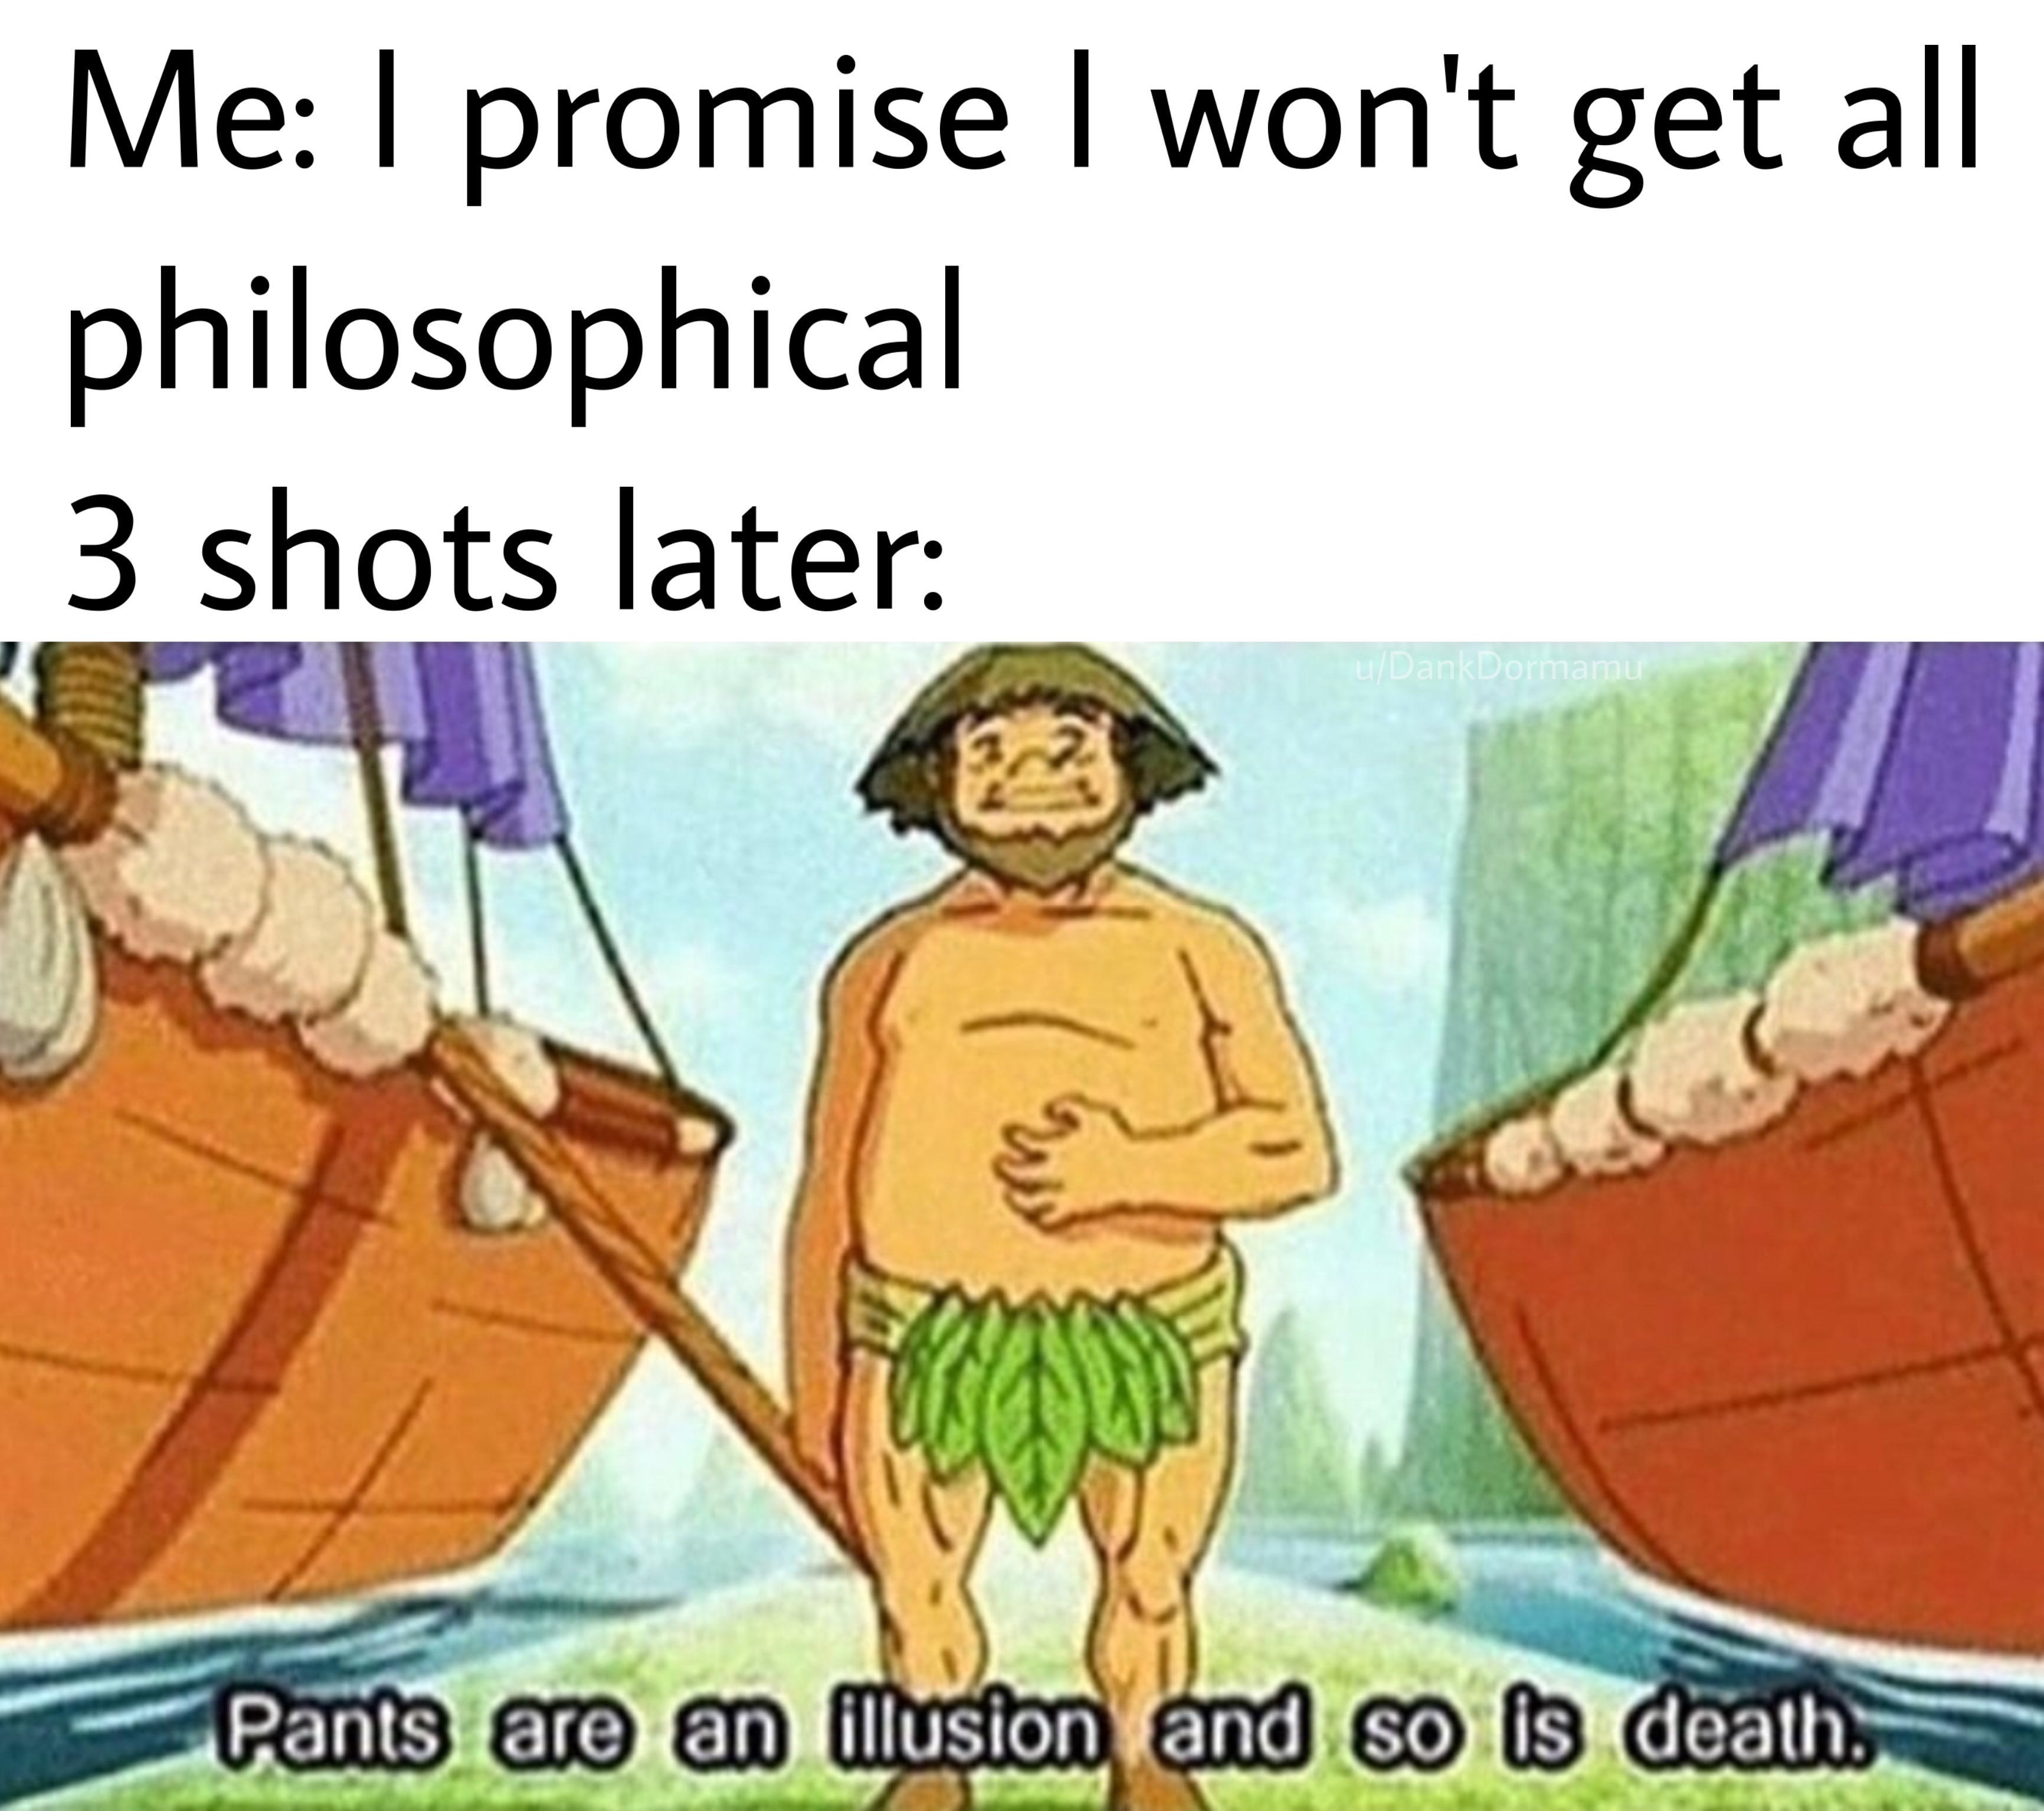 funny memes - pants are an illusion  Me I promise I won't get all philosophical 3 shots later Pants are an illusion and so is death.